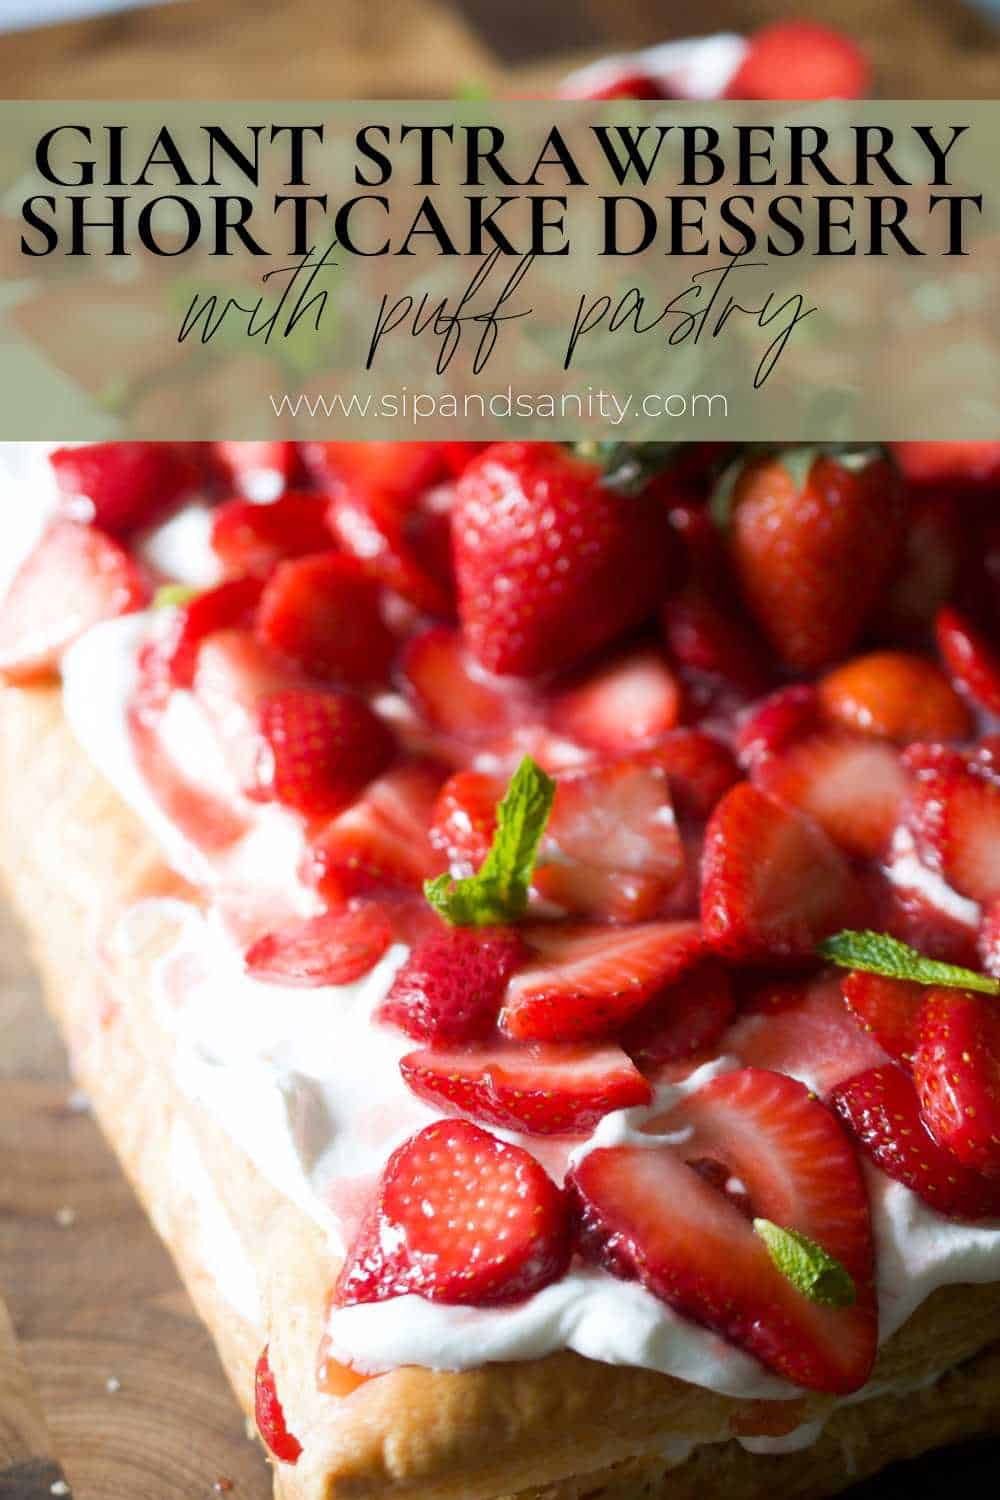 Pin image for giant strawberry shortcake dessert with puff pastry.